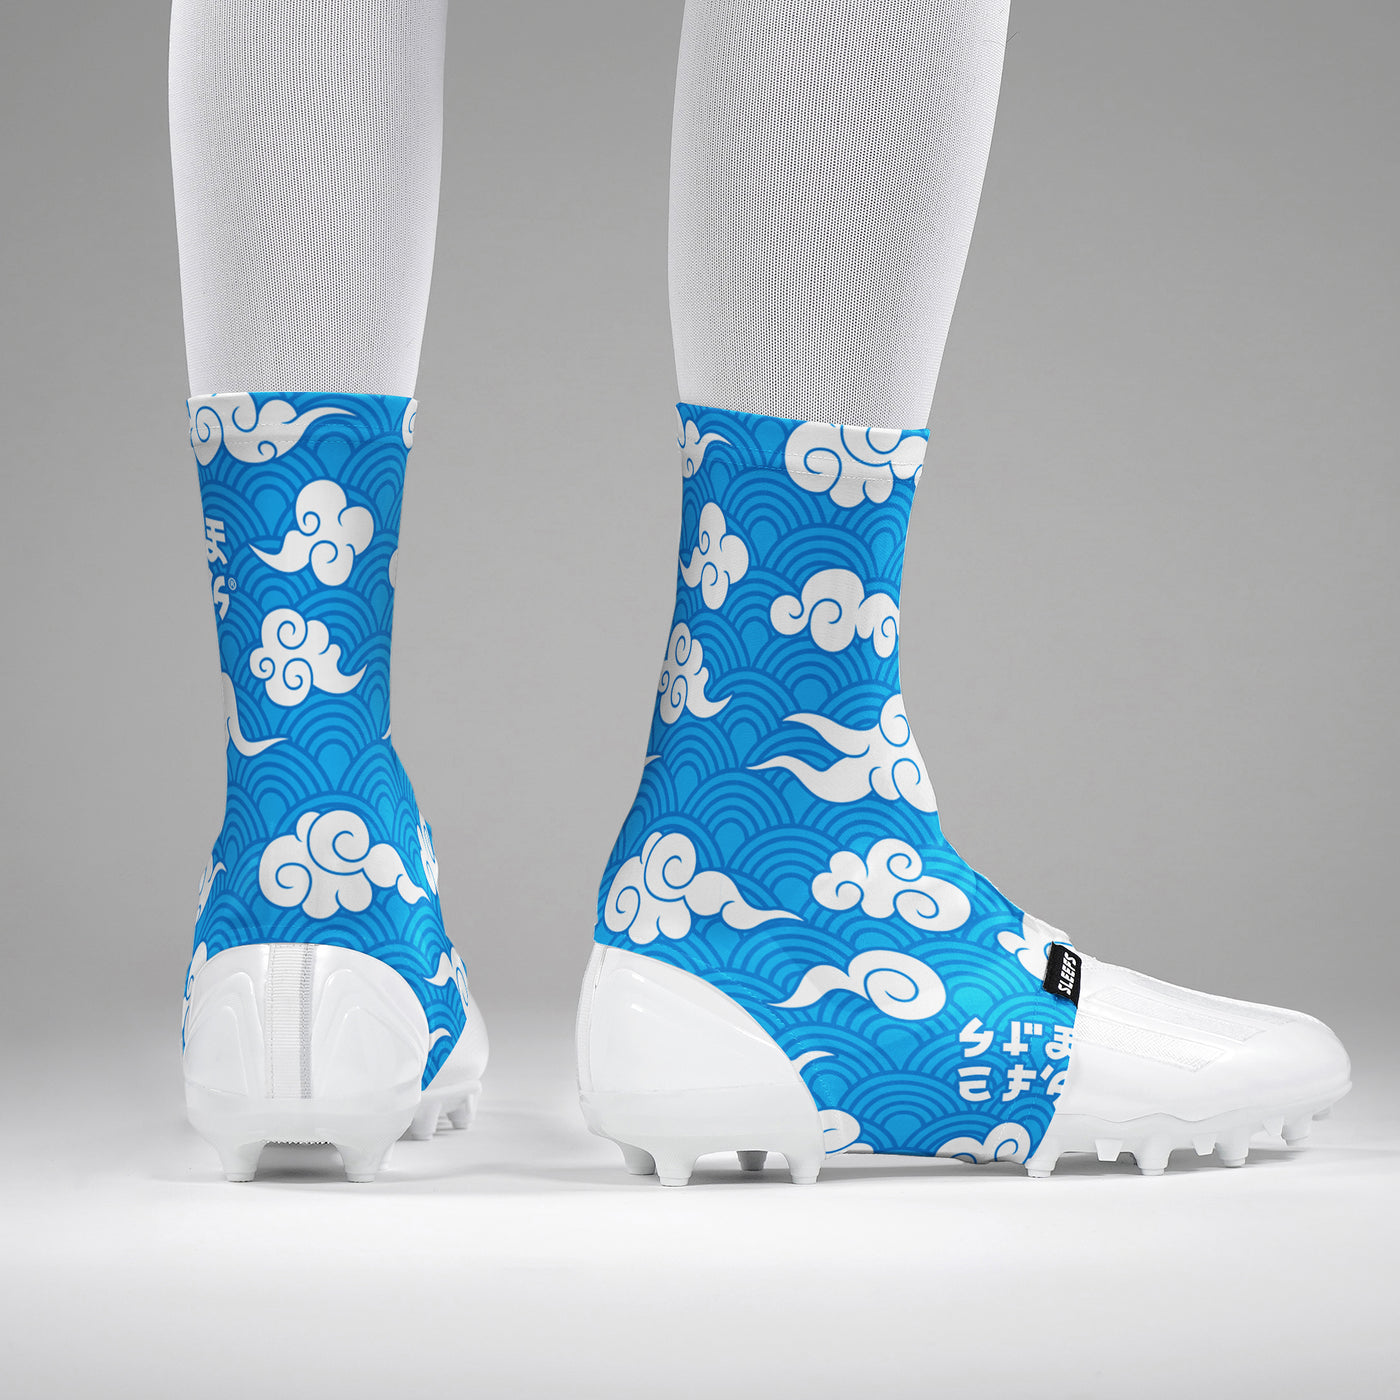 Sleefs Japan Kumo Clouds Spats / Cleat Covers